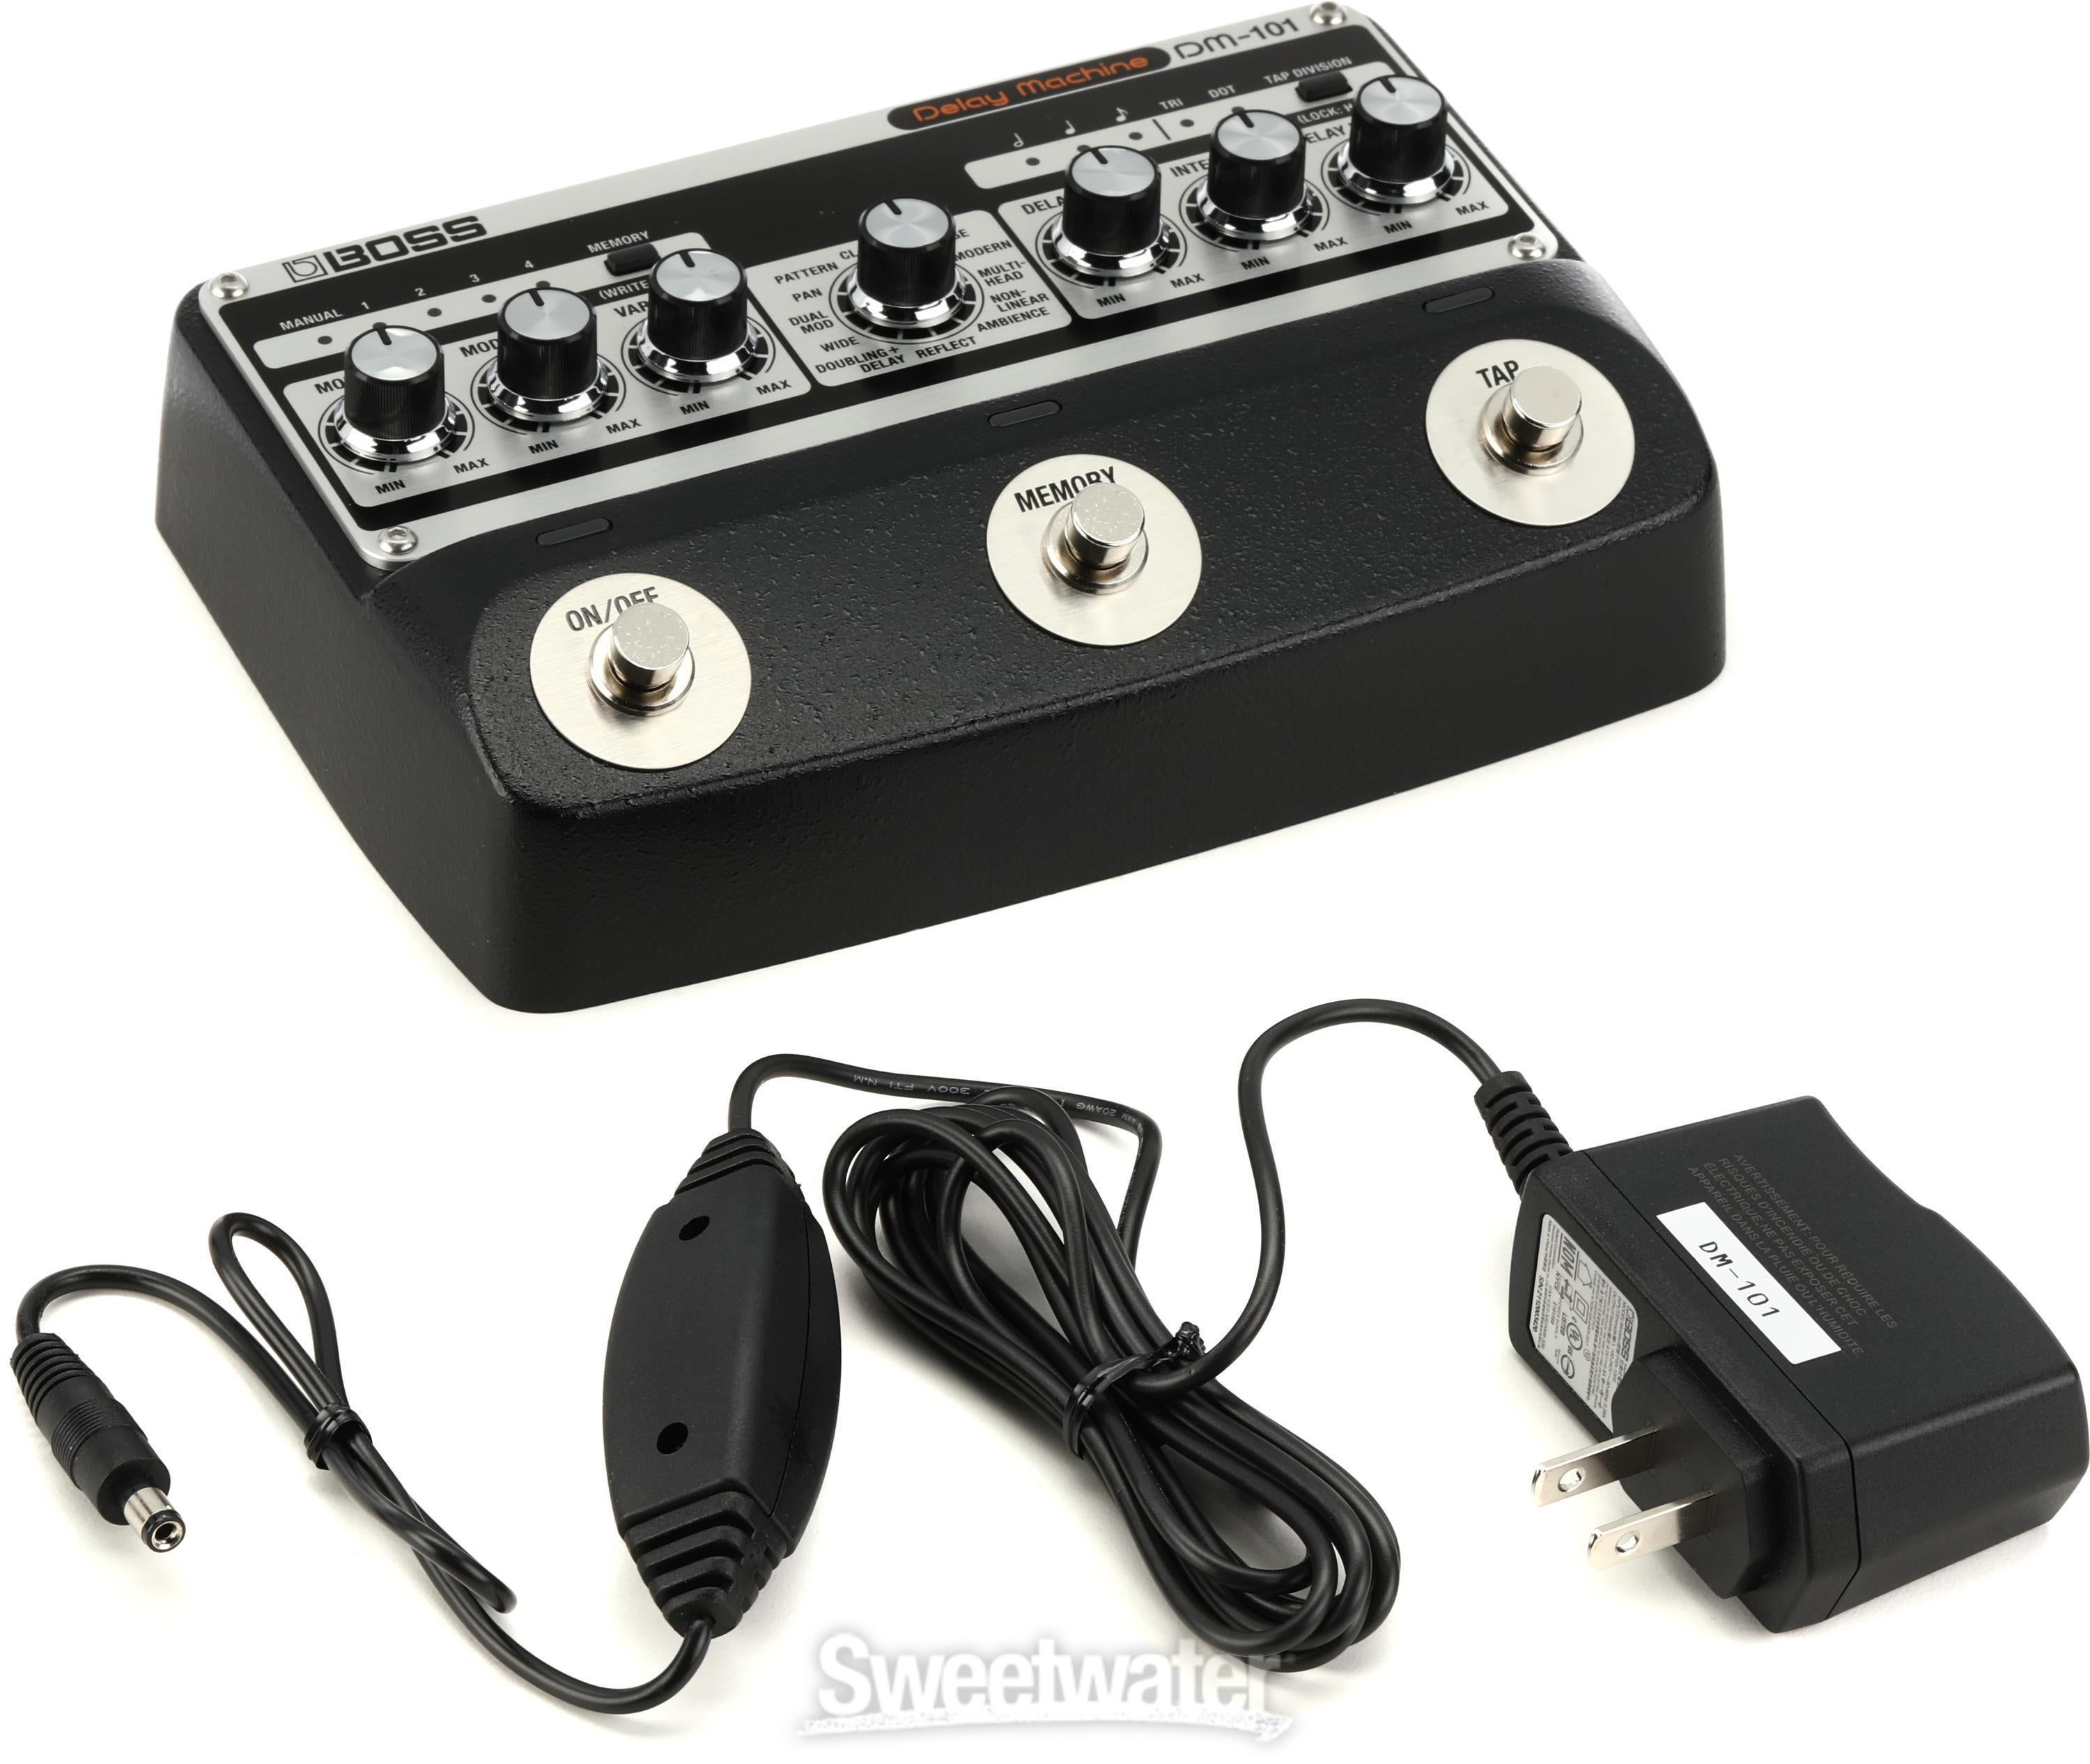 Boss DM-101 Delay Machine Pedal | Sweetwater